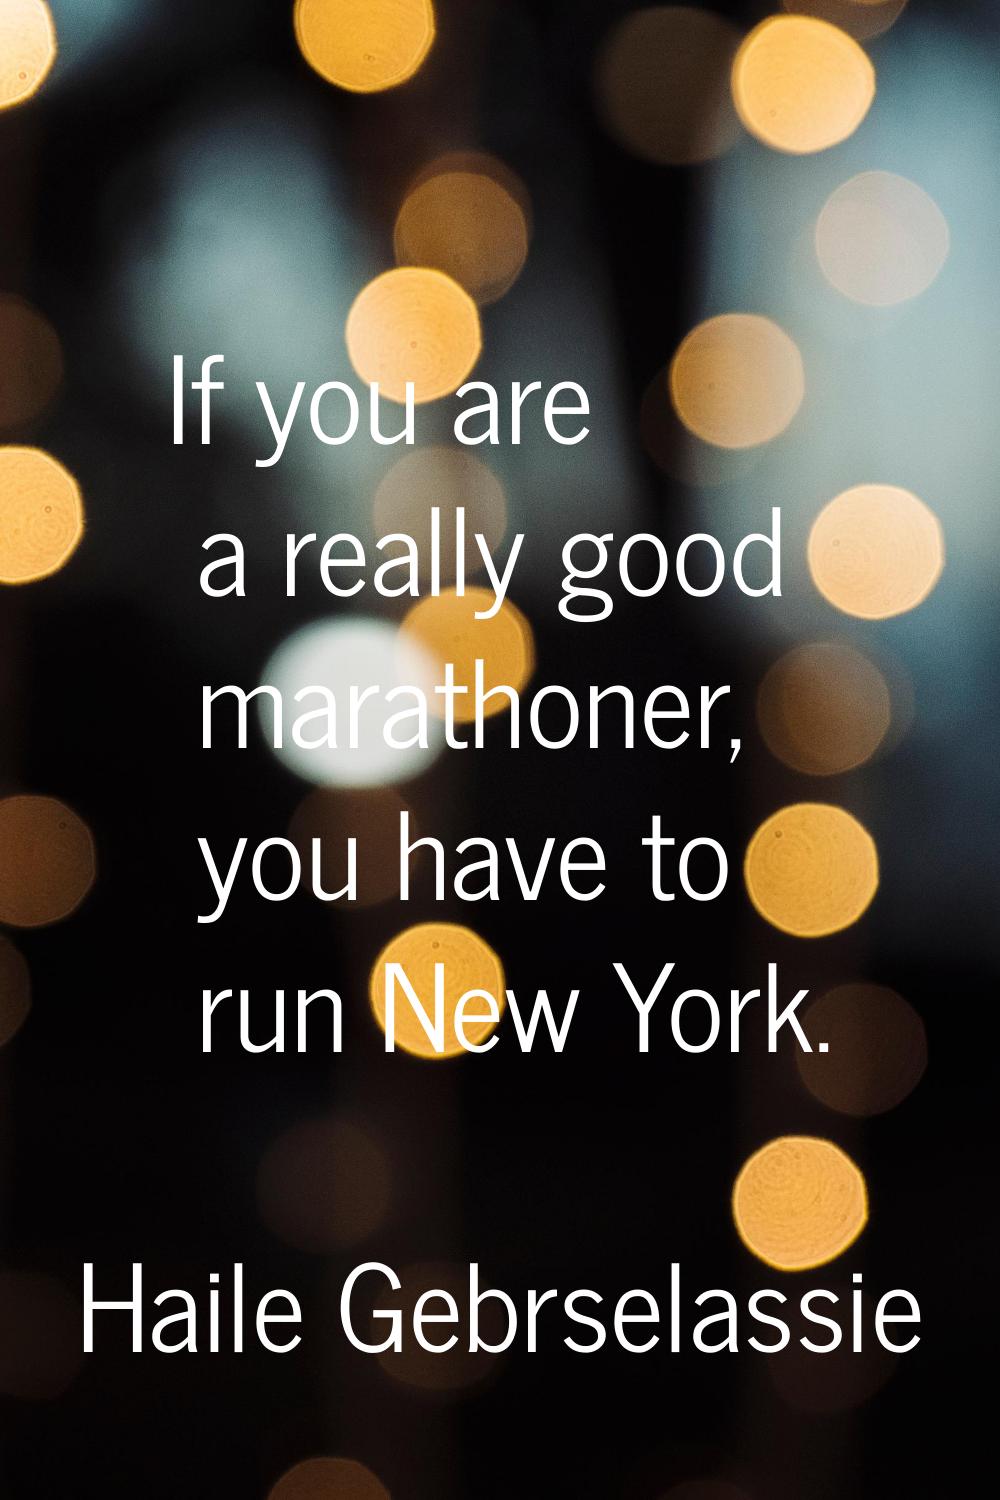 If you are a really good marathoner, you have to run New York.